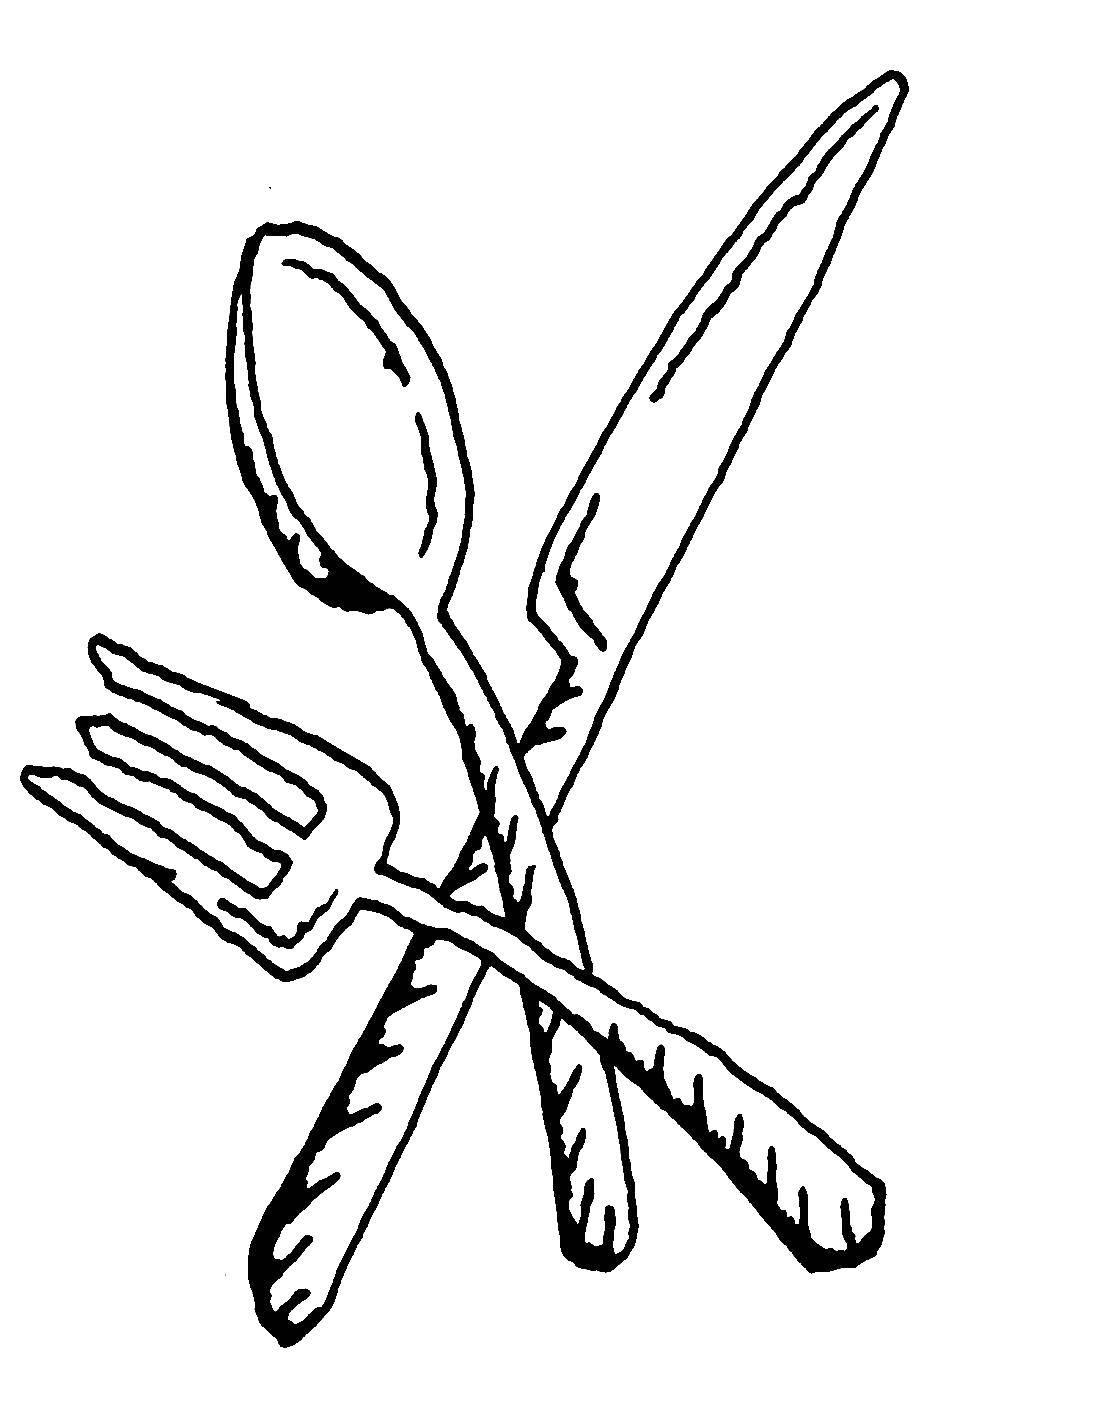 Online coloring pages coloring page cutlery knife download print coloring page